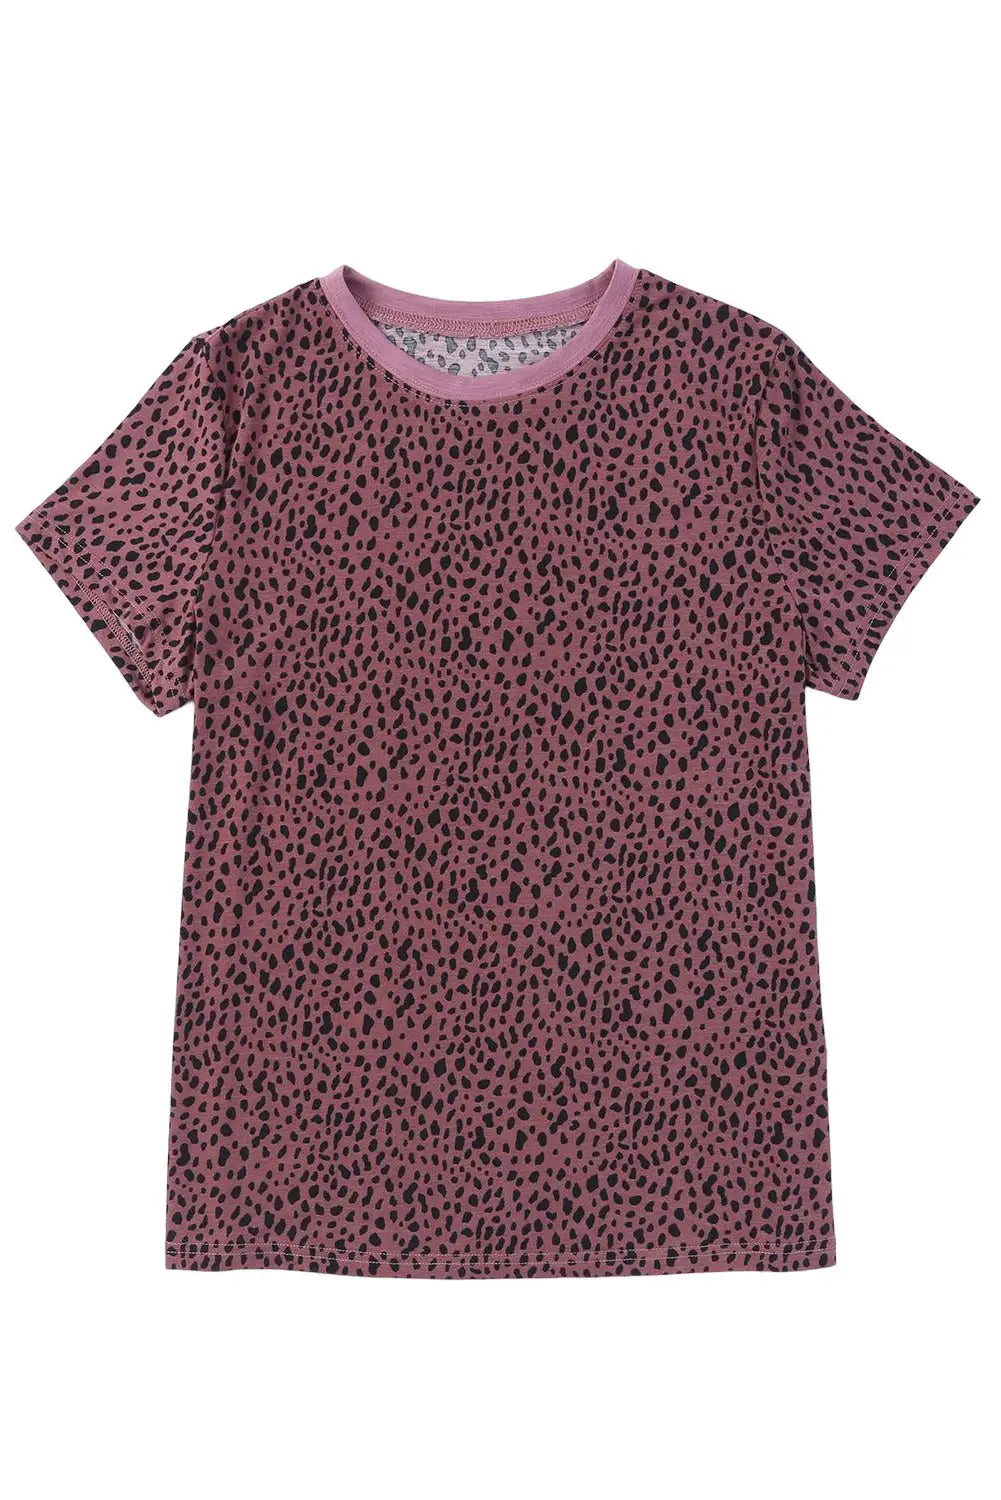 Animal Spotted Print Round Neck Long Sleeve Top-38